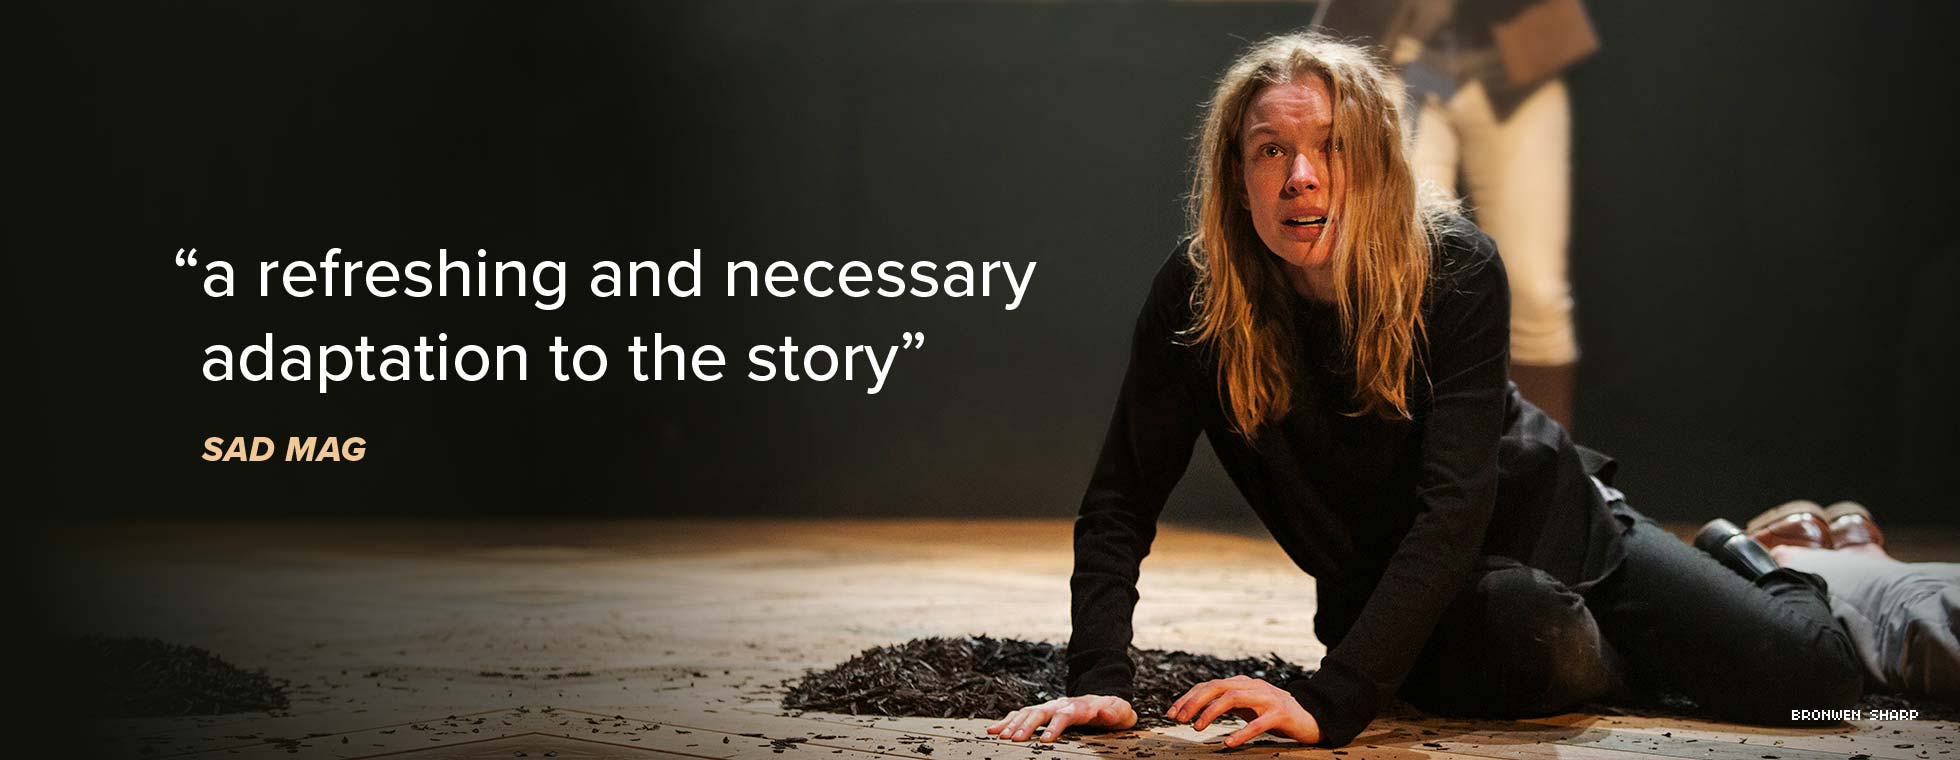 Sad Mag calls Prince Hamlet “a refreshing and necessary adaptation to the story.” A woman lying next to a pile of stones hoists herself up from the ground. 